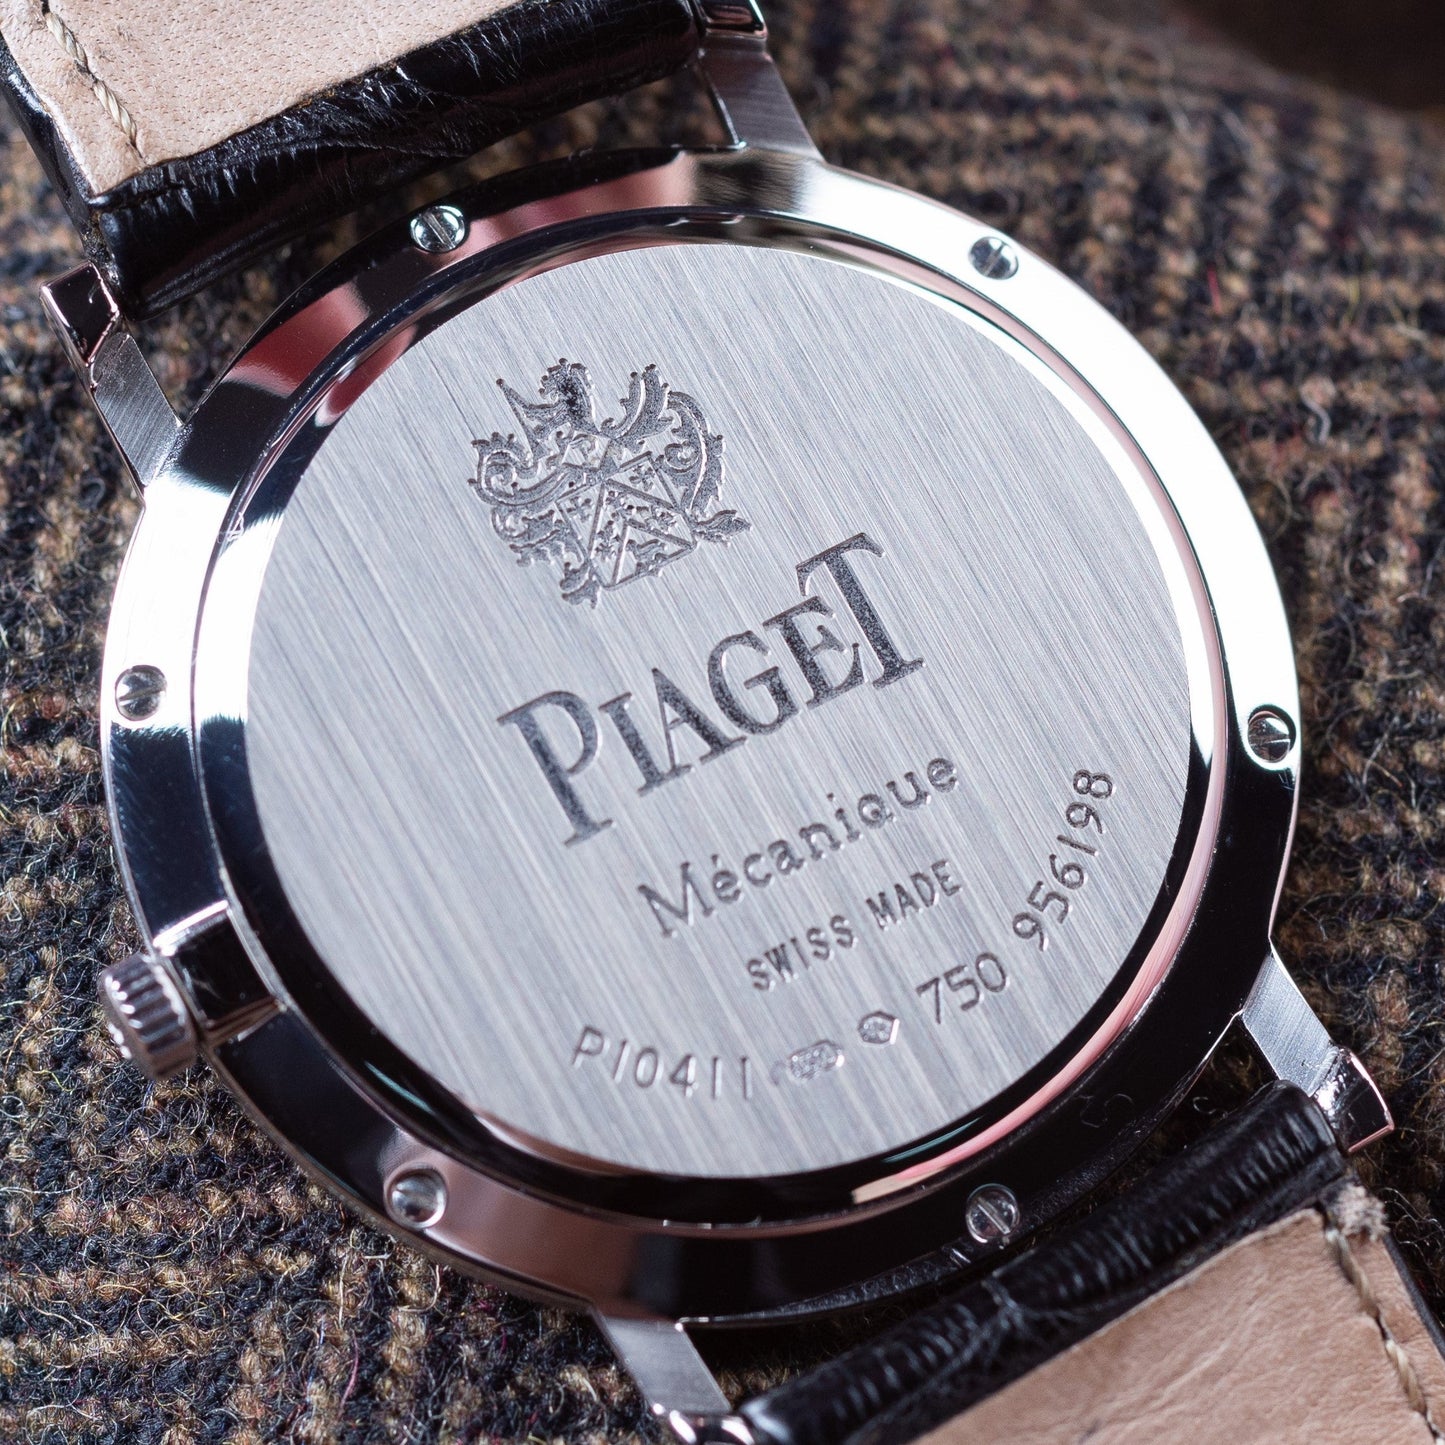 Piaget Altiplano P10411 36mm Manual Winding - PM Vintage Watches - Piaget